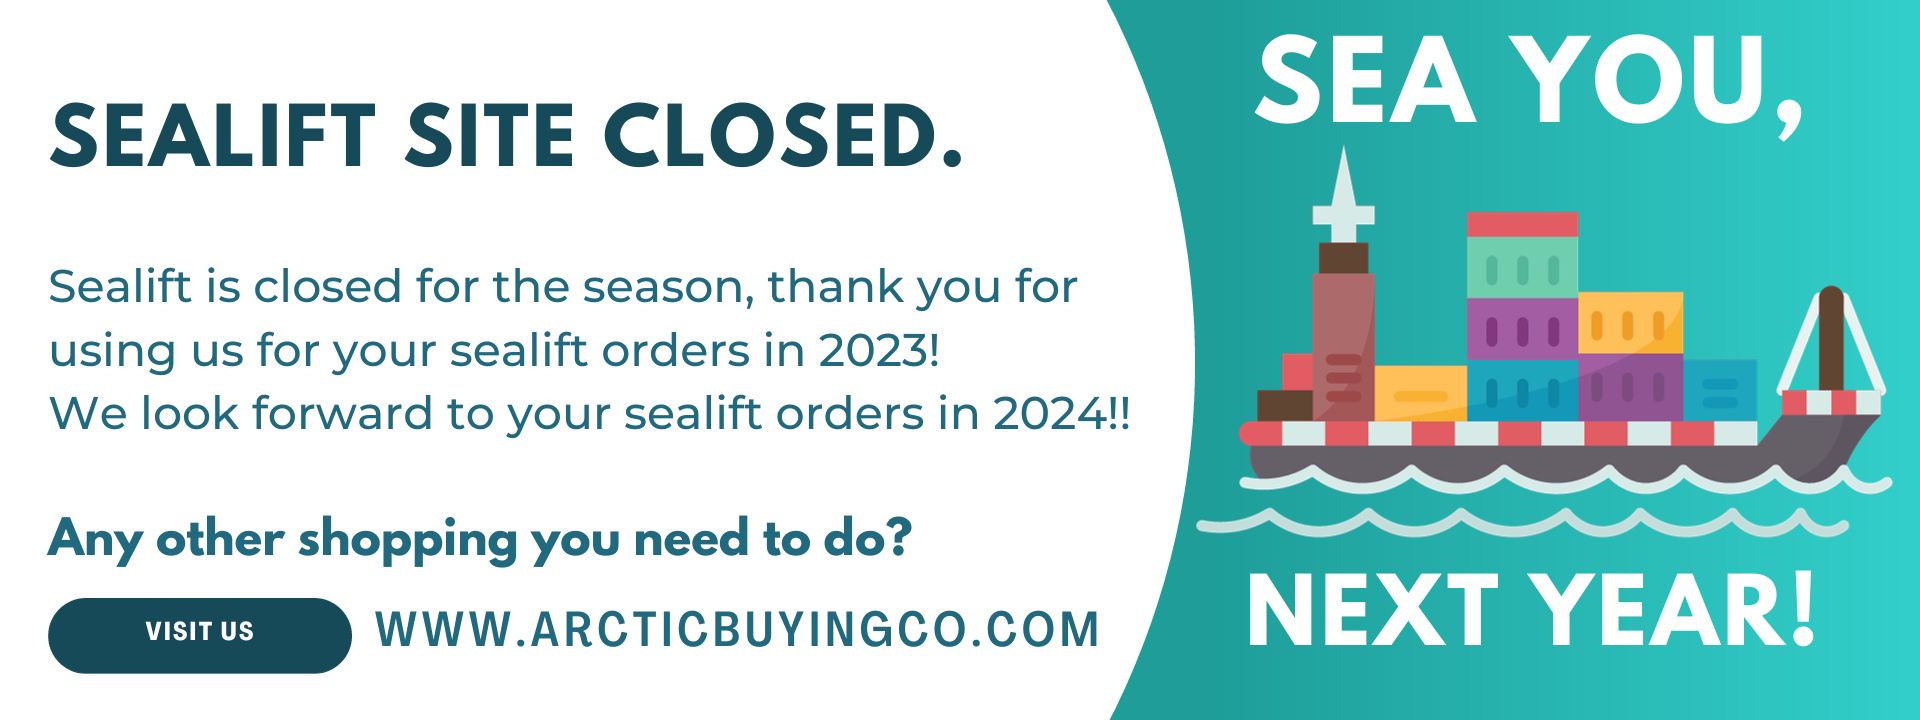 Sealift Site Closed - Sea You Next Year!